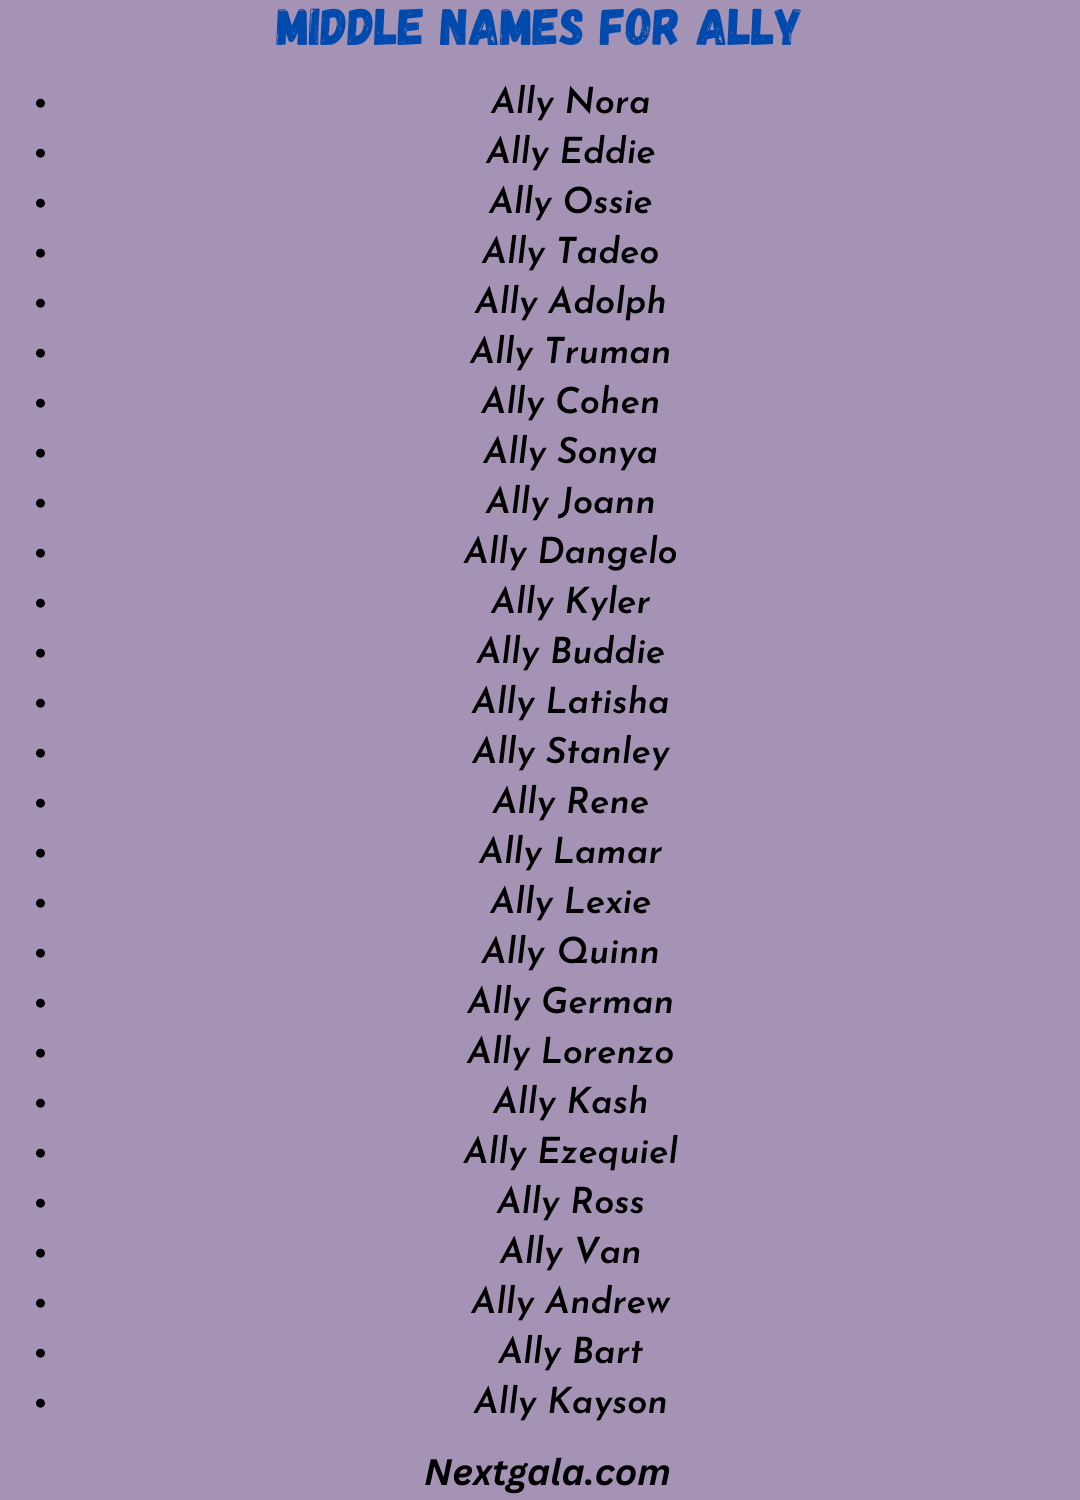 Middle Names for Ally